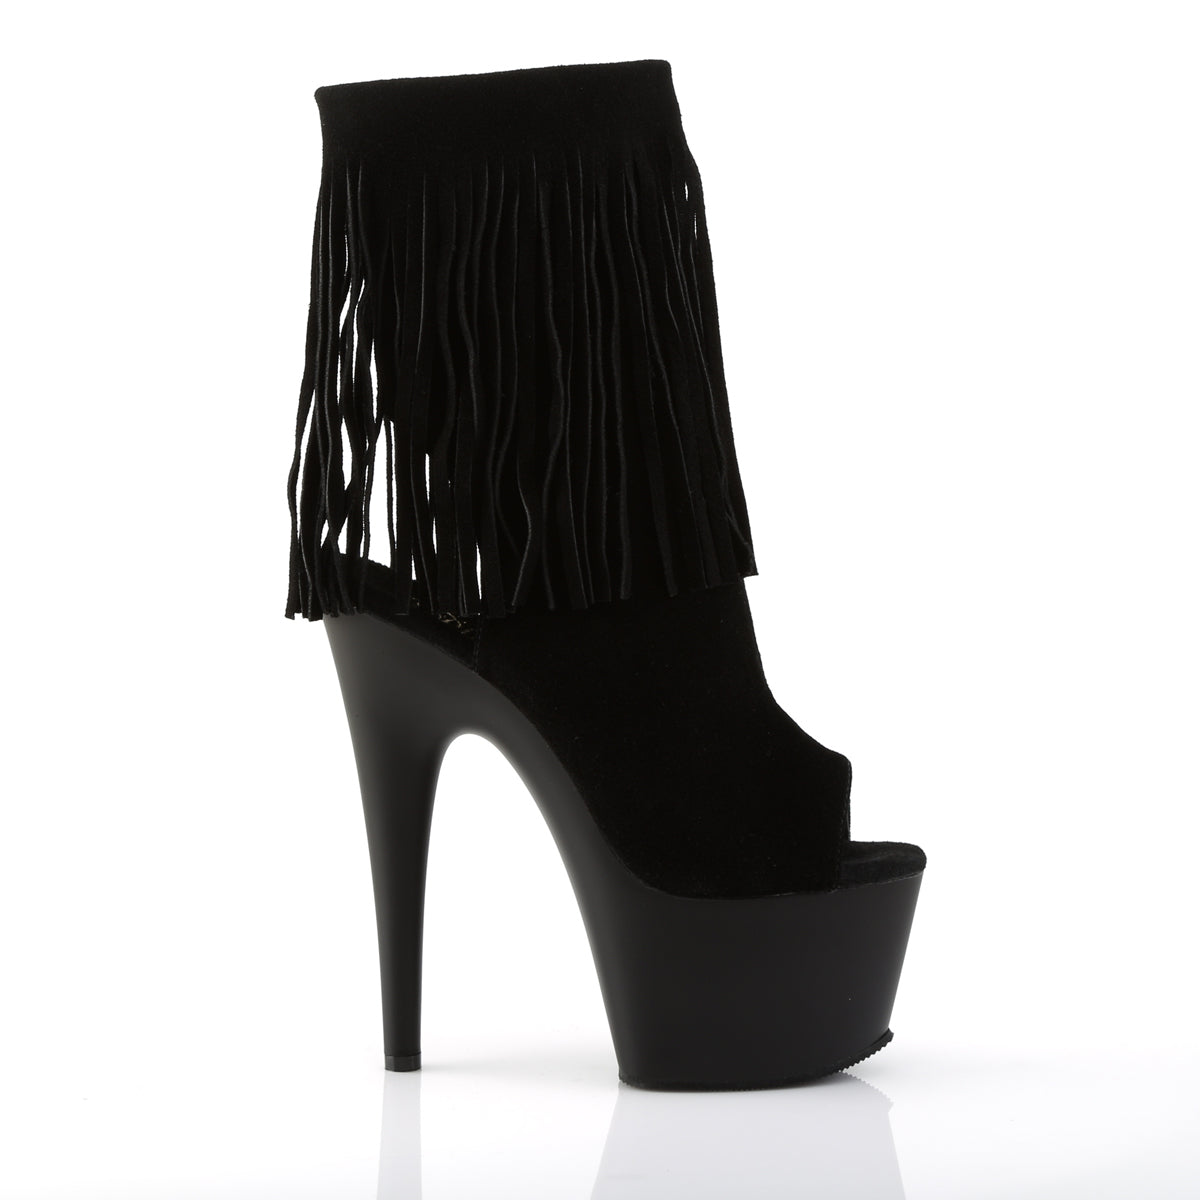 ADORE-1019 7 Inch Heel Black Suede Exotic Dancing Ankle Boot-Pleaser- Sexy Shoes Fetish Heels